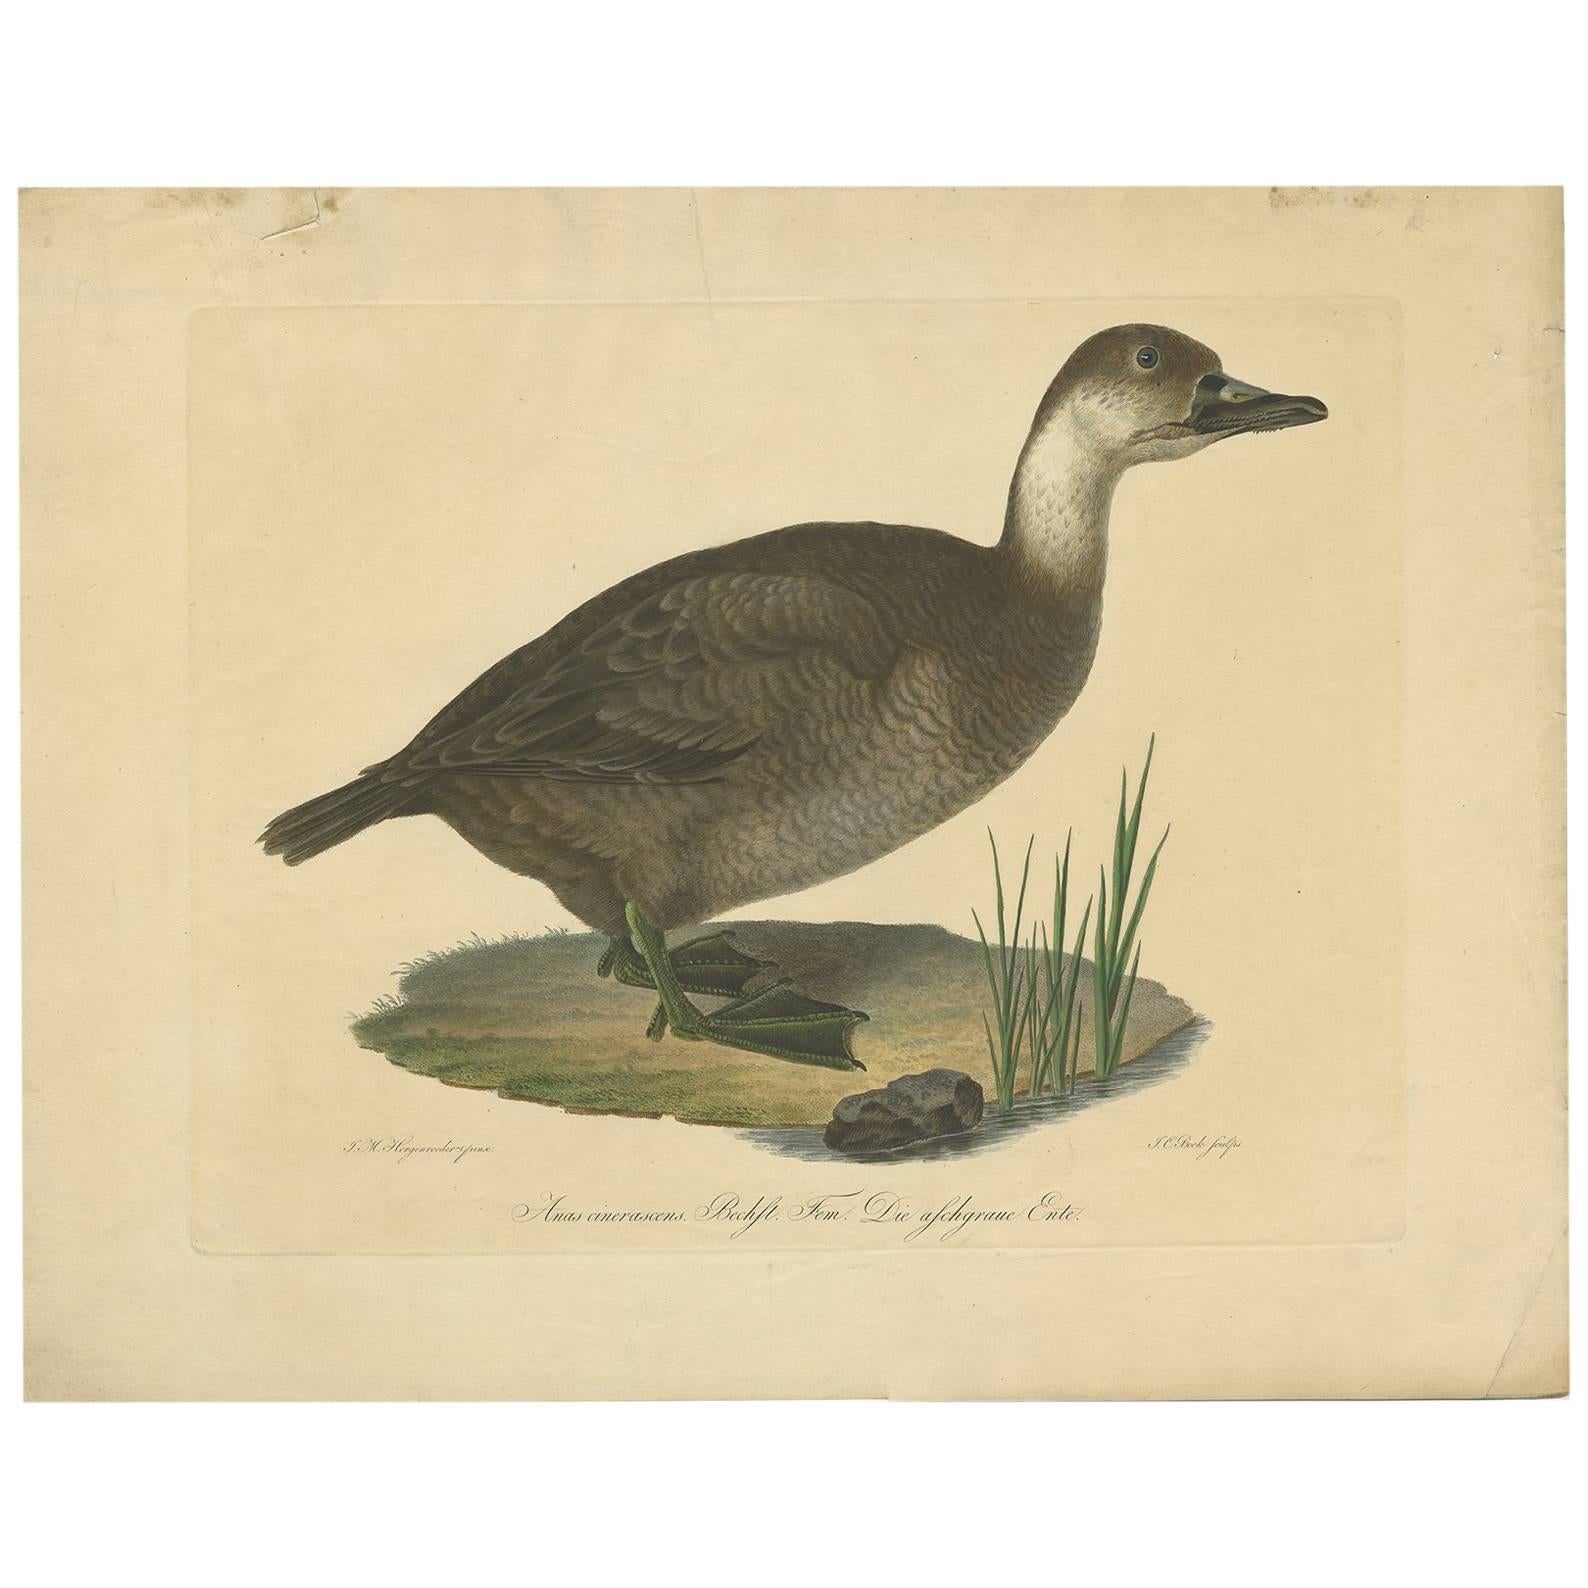 Antique Print of a Duck by J.C. Bock, circa 1800